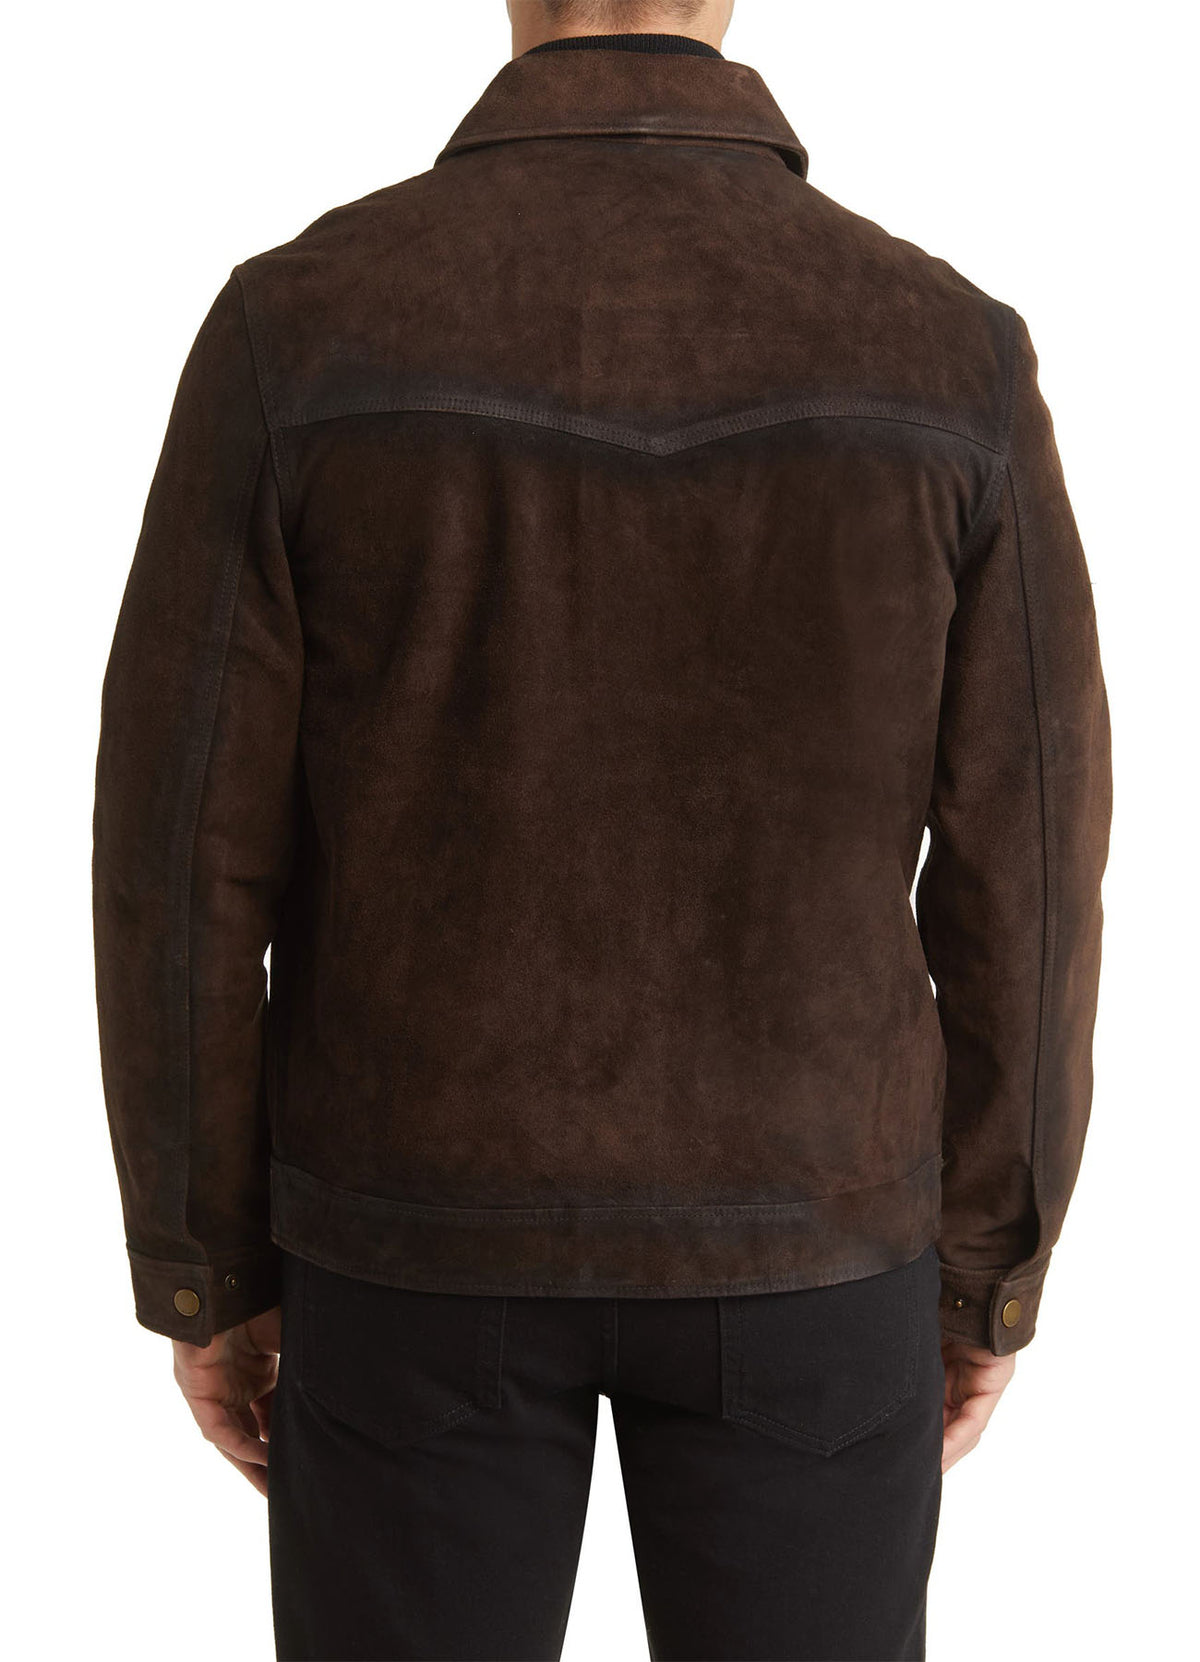 Mens Chocolate Brown Suede Leather Jacket | Shop Now!